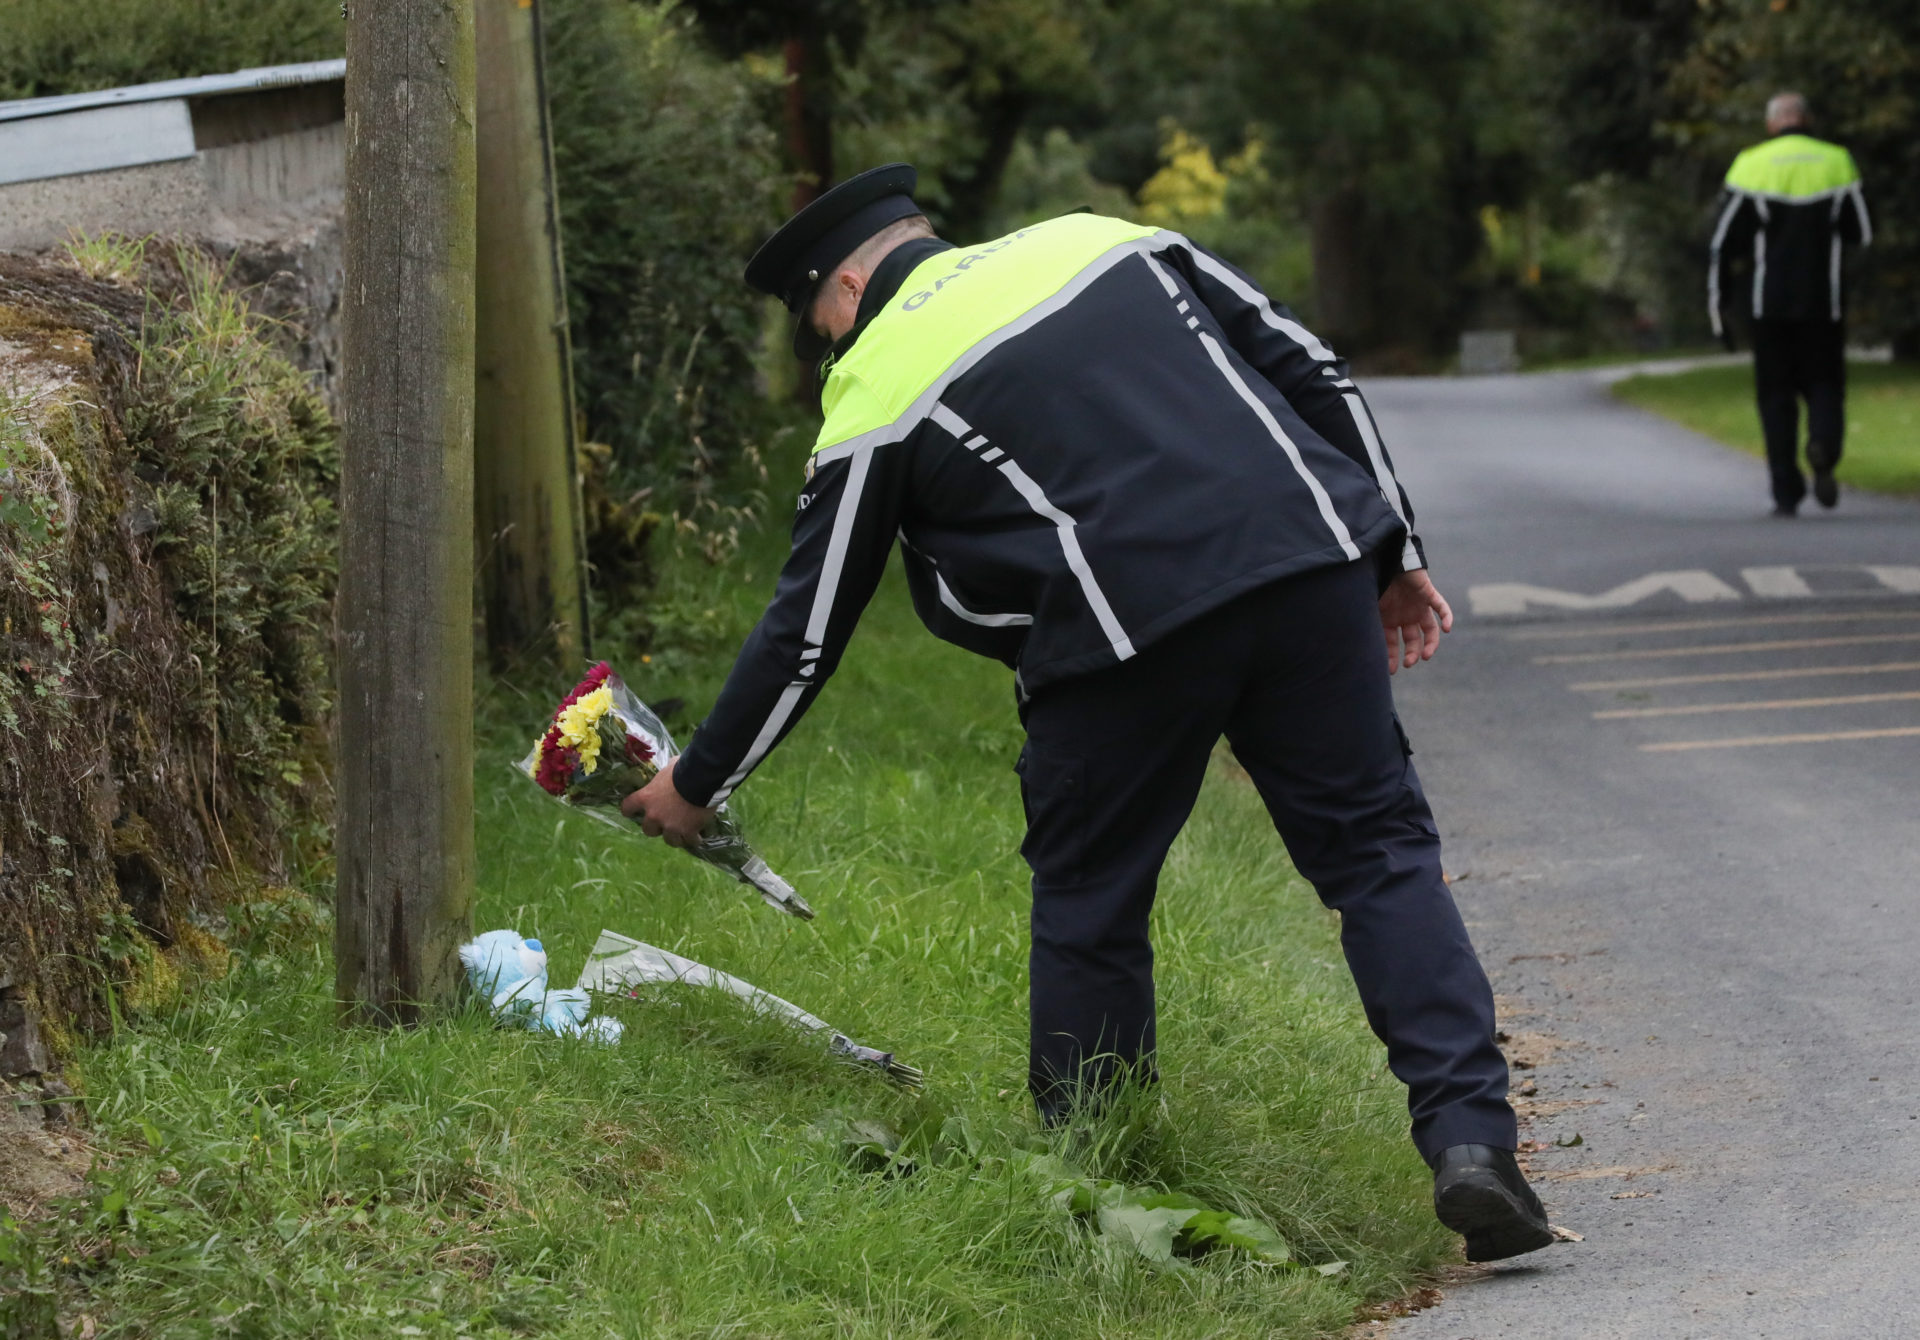 30/08/2023 Tipperary, Ireland. A member of An Garda Siochana places flowers given by the public near the scene of the crash in the Windmill Knockbulloge area of Cashel, Co. Tipperary, which claimed the lives of three people last night. Tom Reilly (48), his wife Bridge Reilly (45) and their grandson Tommy Reilly (3) died after the car they were travelling in hit a wall shortly before 9pm yesterday. Two further passengers have been hospitalised following the incident. Photograph: Sasko Lazarov / © RollingNews.ie